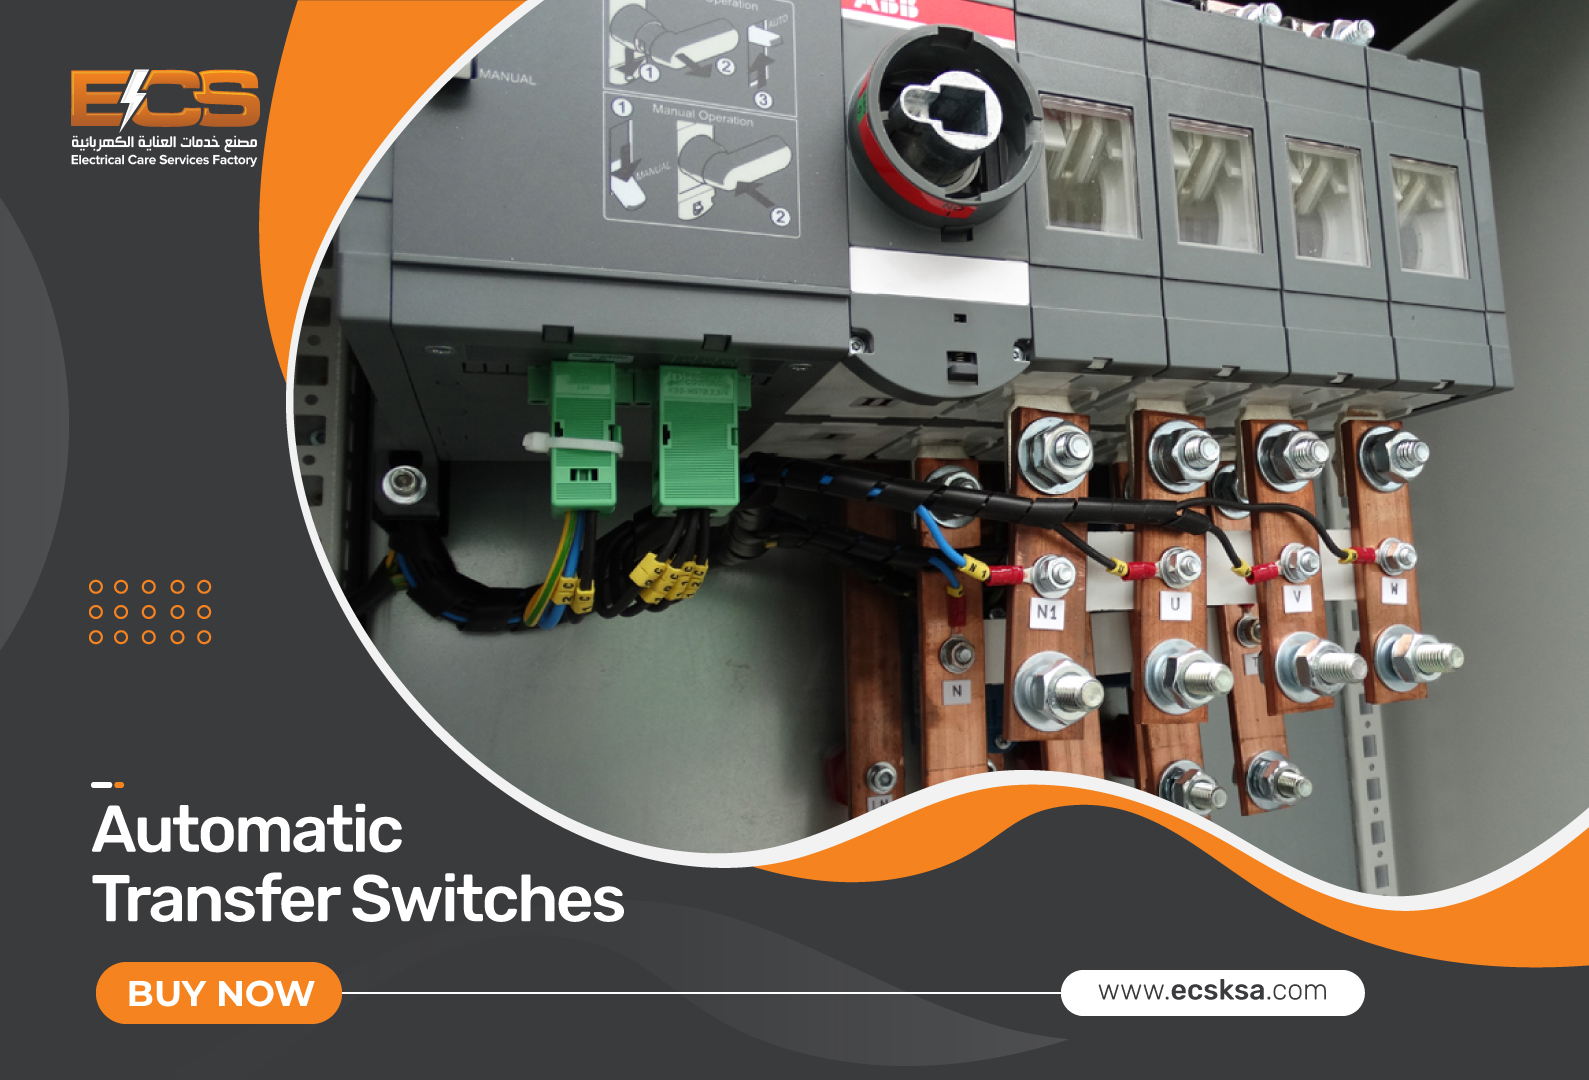 What is an Automatic Transfer Switch